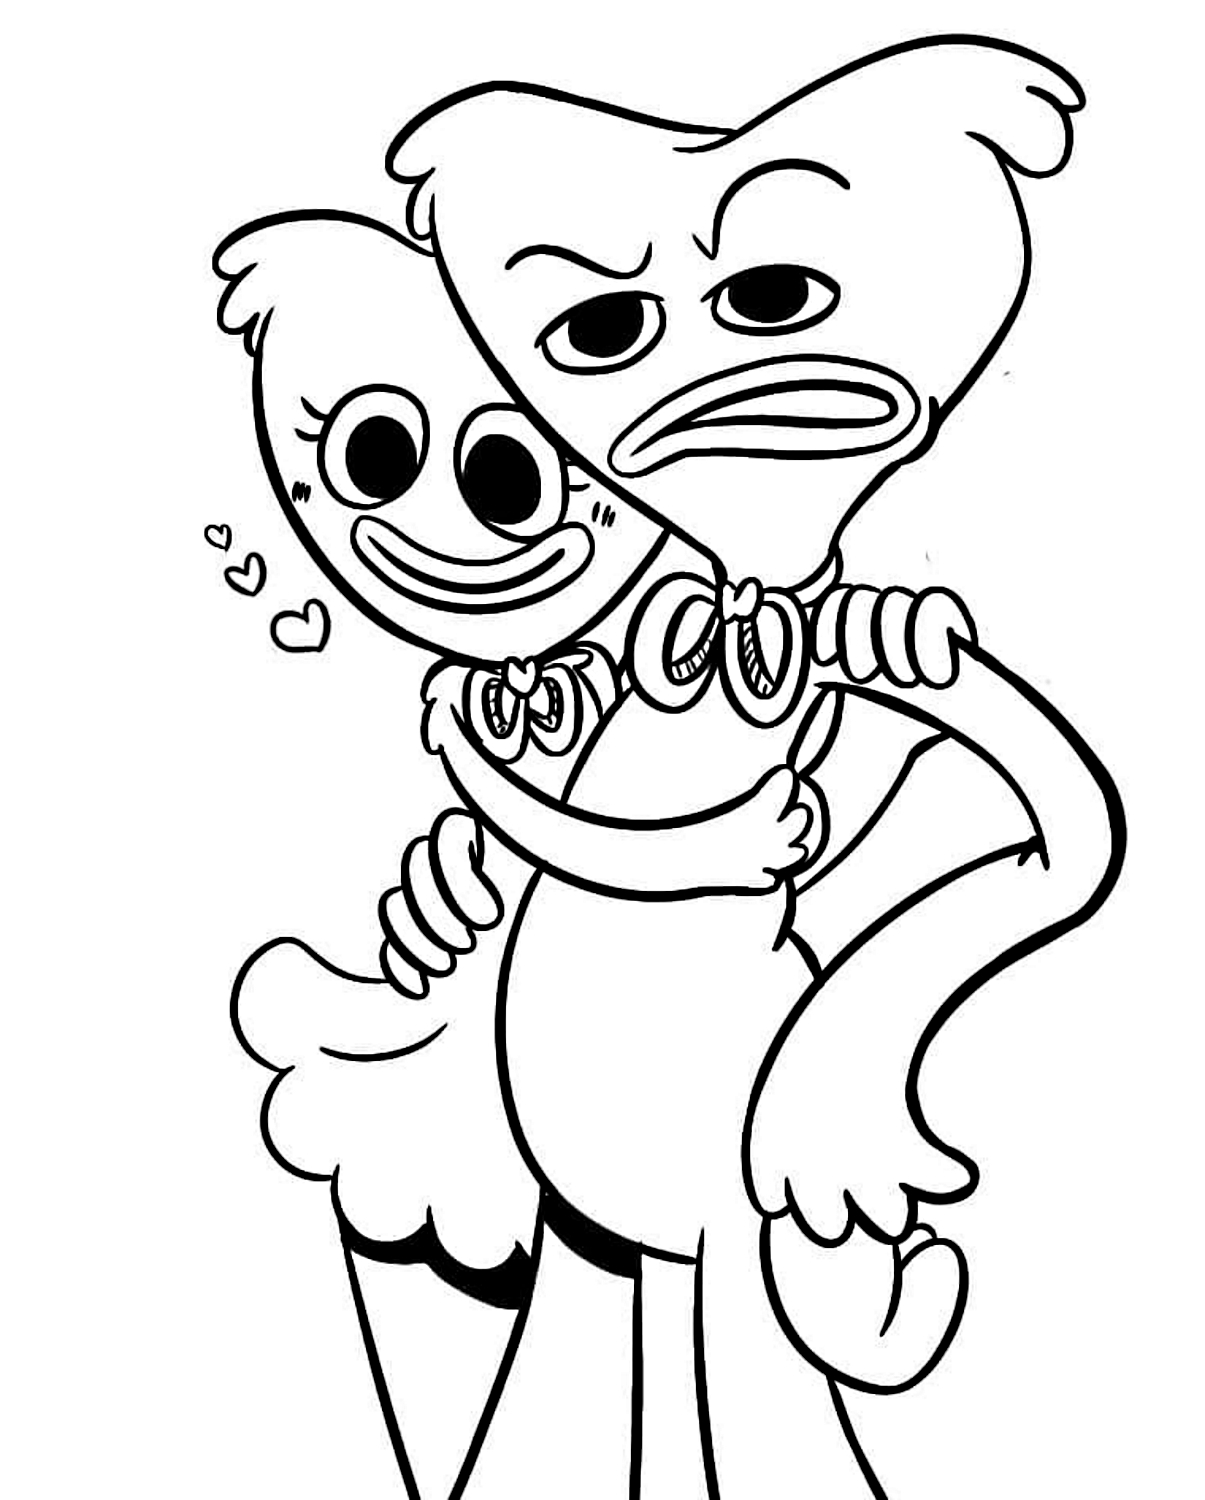 Kissy Missy 10 from Poppy Playtime coloring page to print and coloring